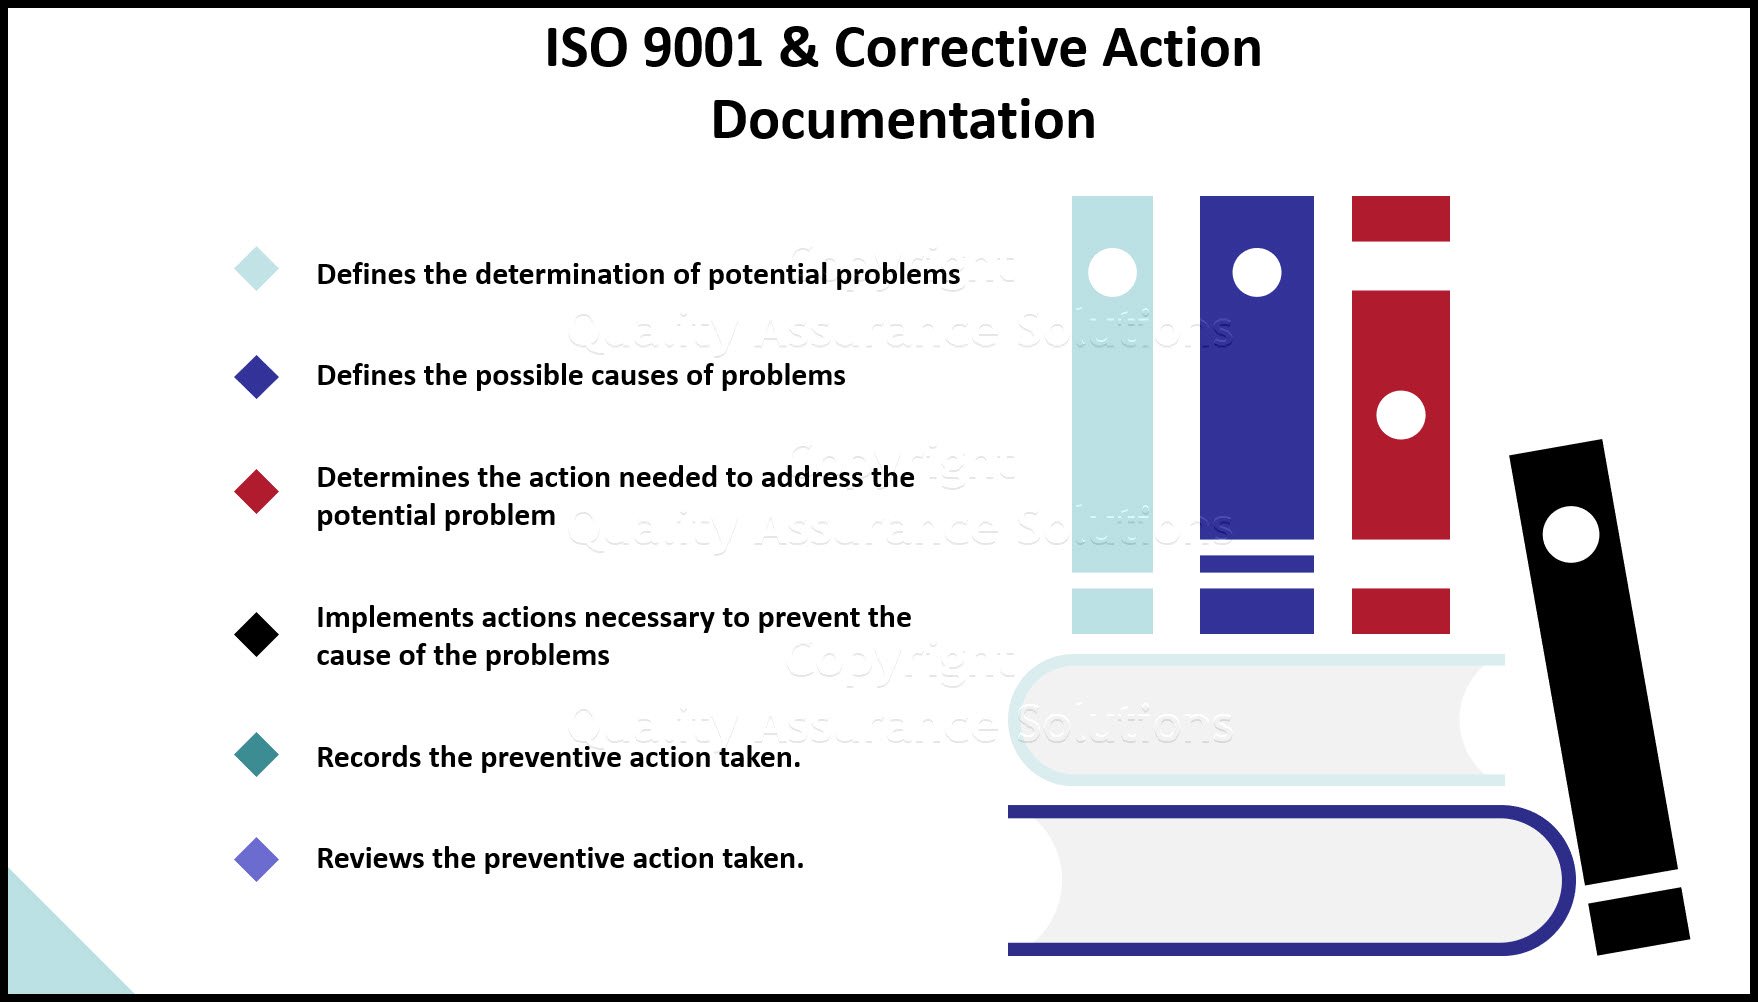 We break down the differences between corrective and preventive action management systems and preventive maintenance for ISO 9001